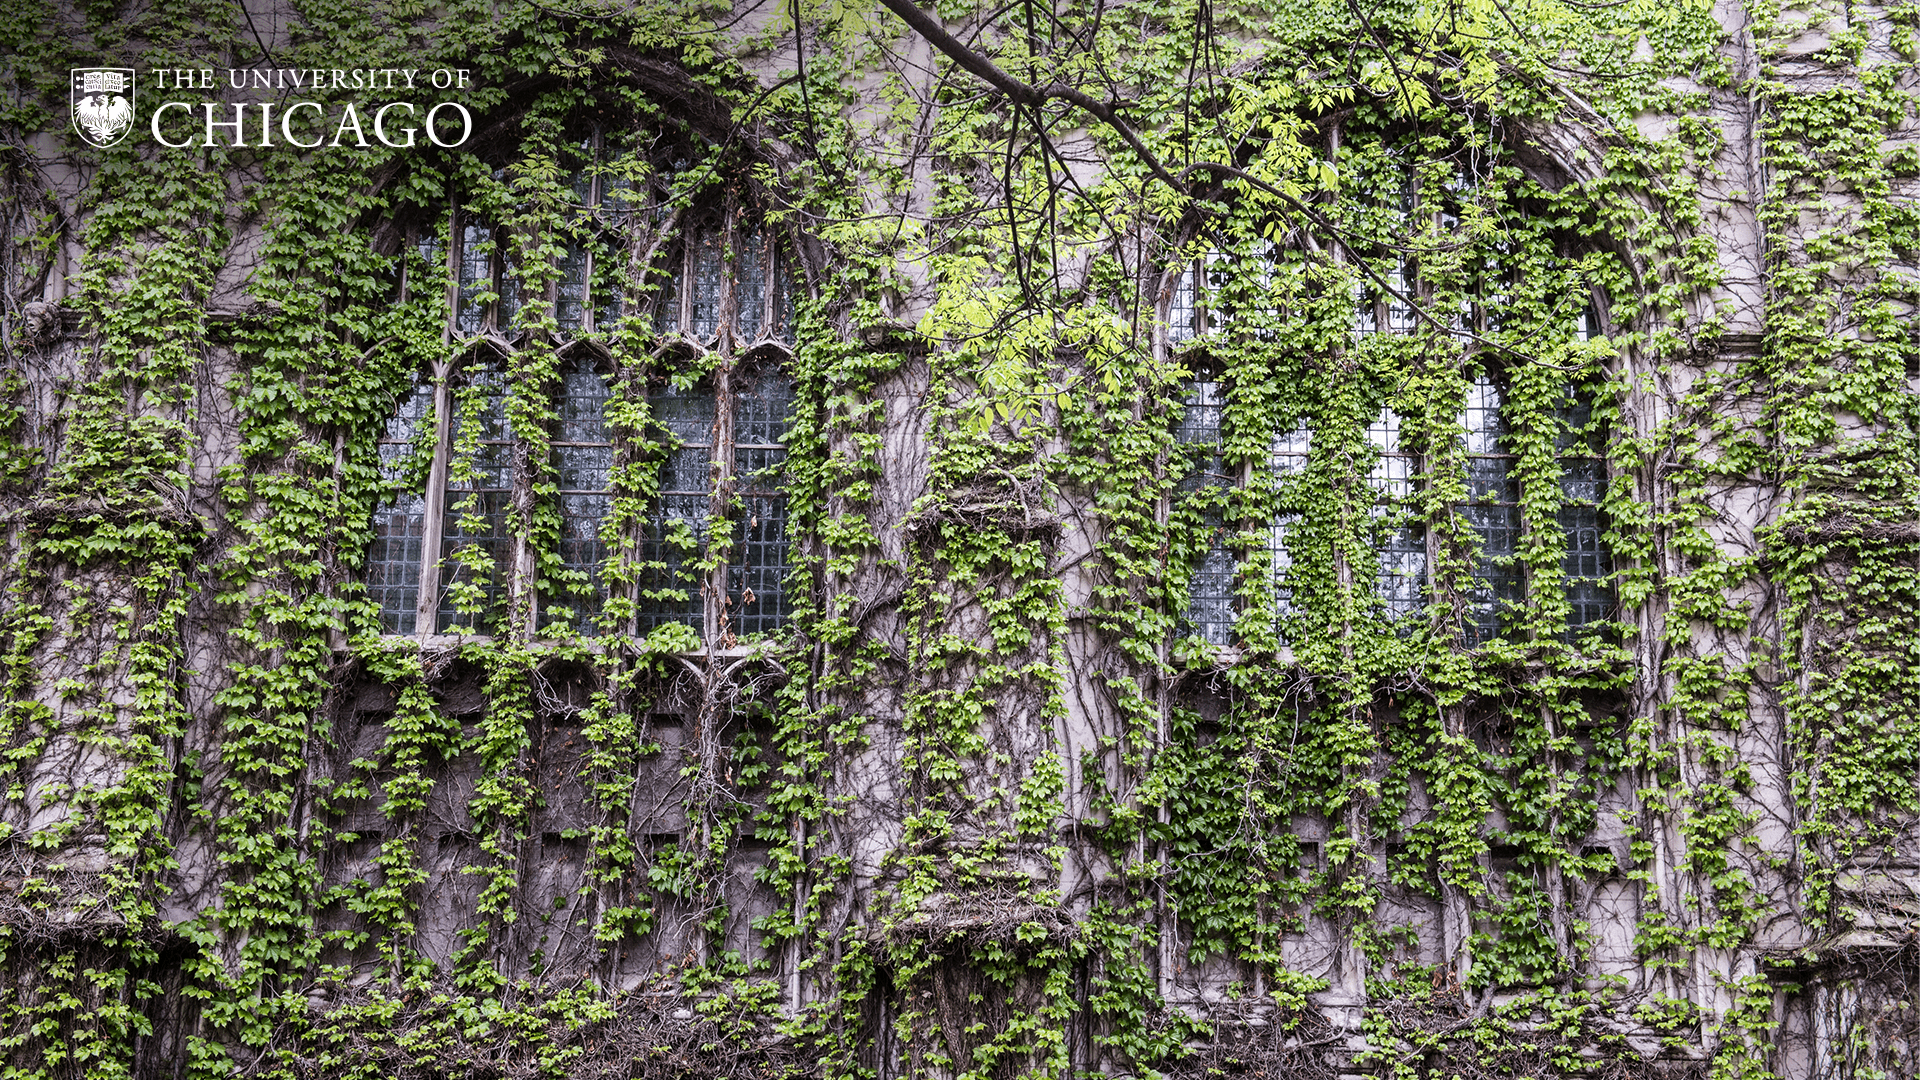 Arched gothic windows covered in green ivy